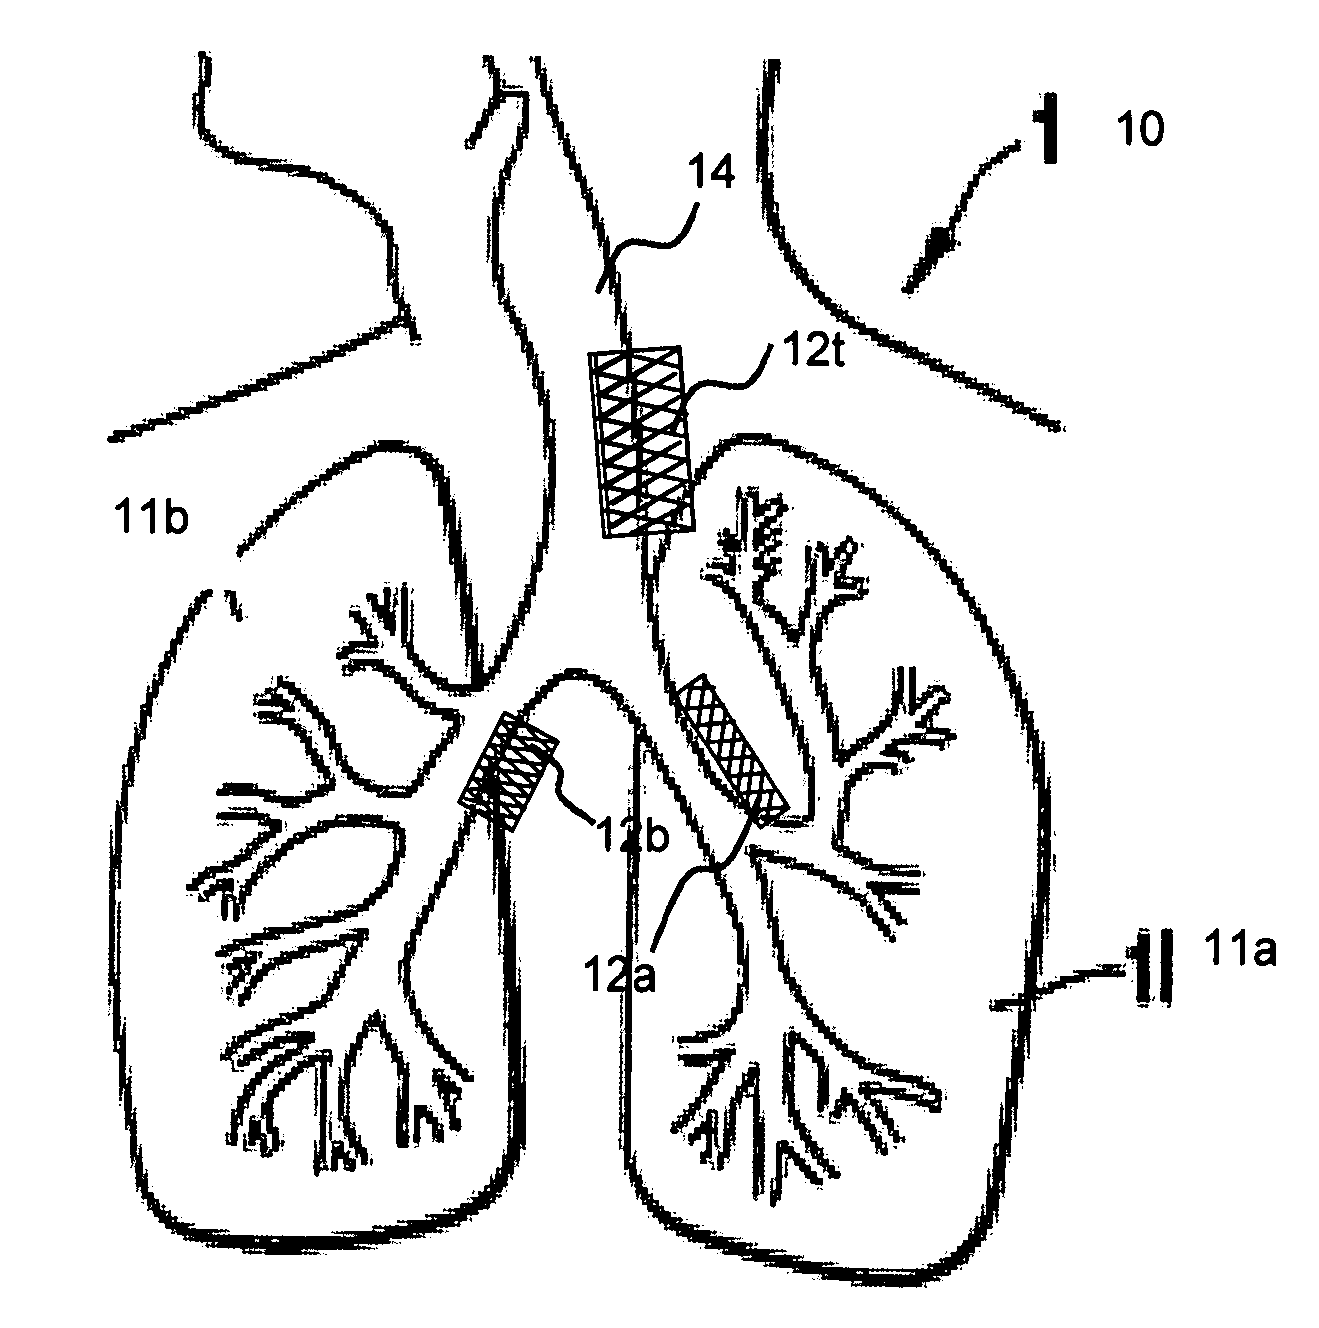 Therapeutic agent delivery for the treatment of asthma via implantable and insertable medical devices